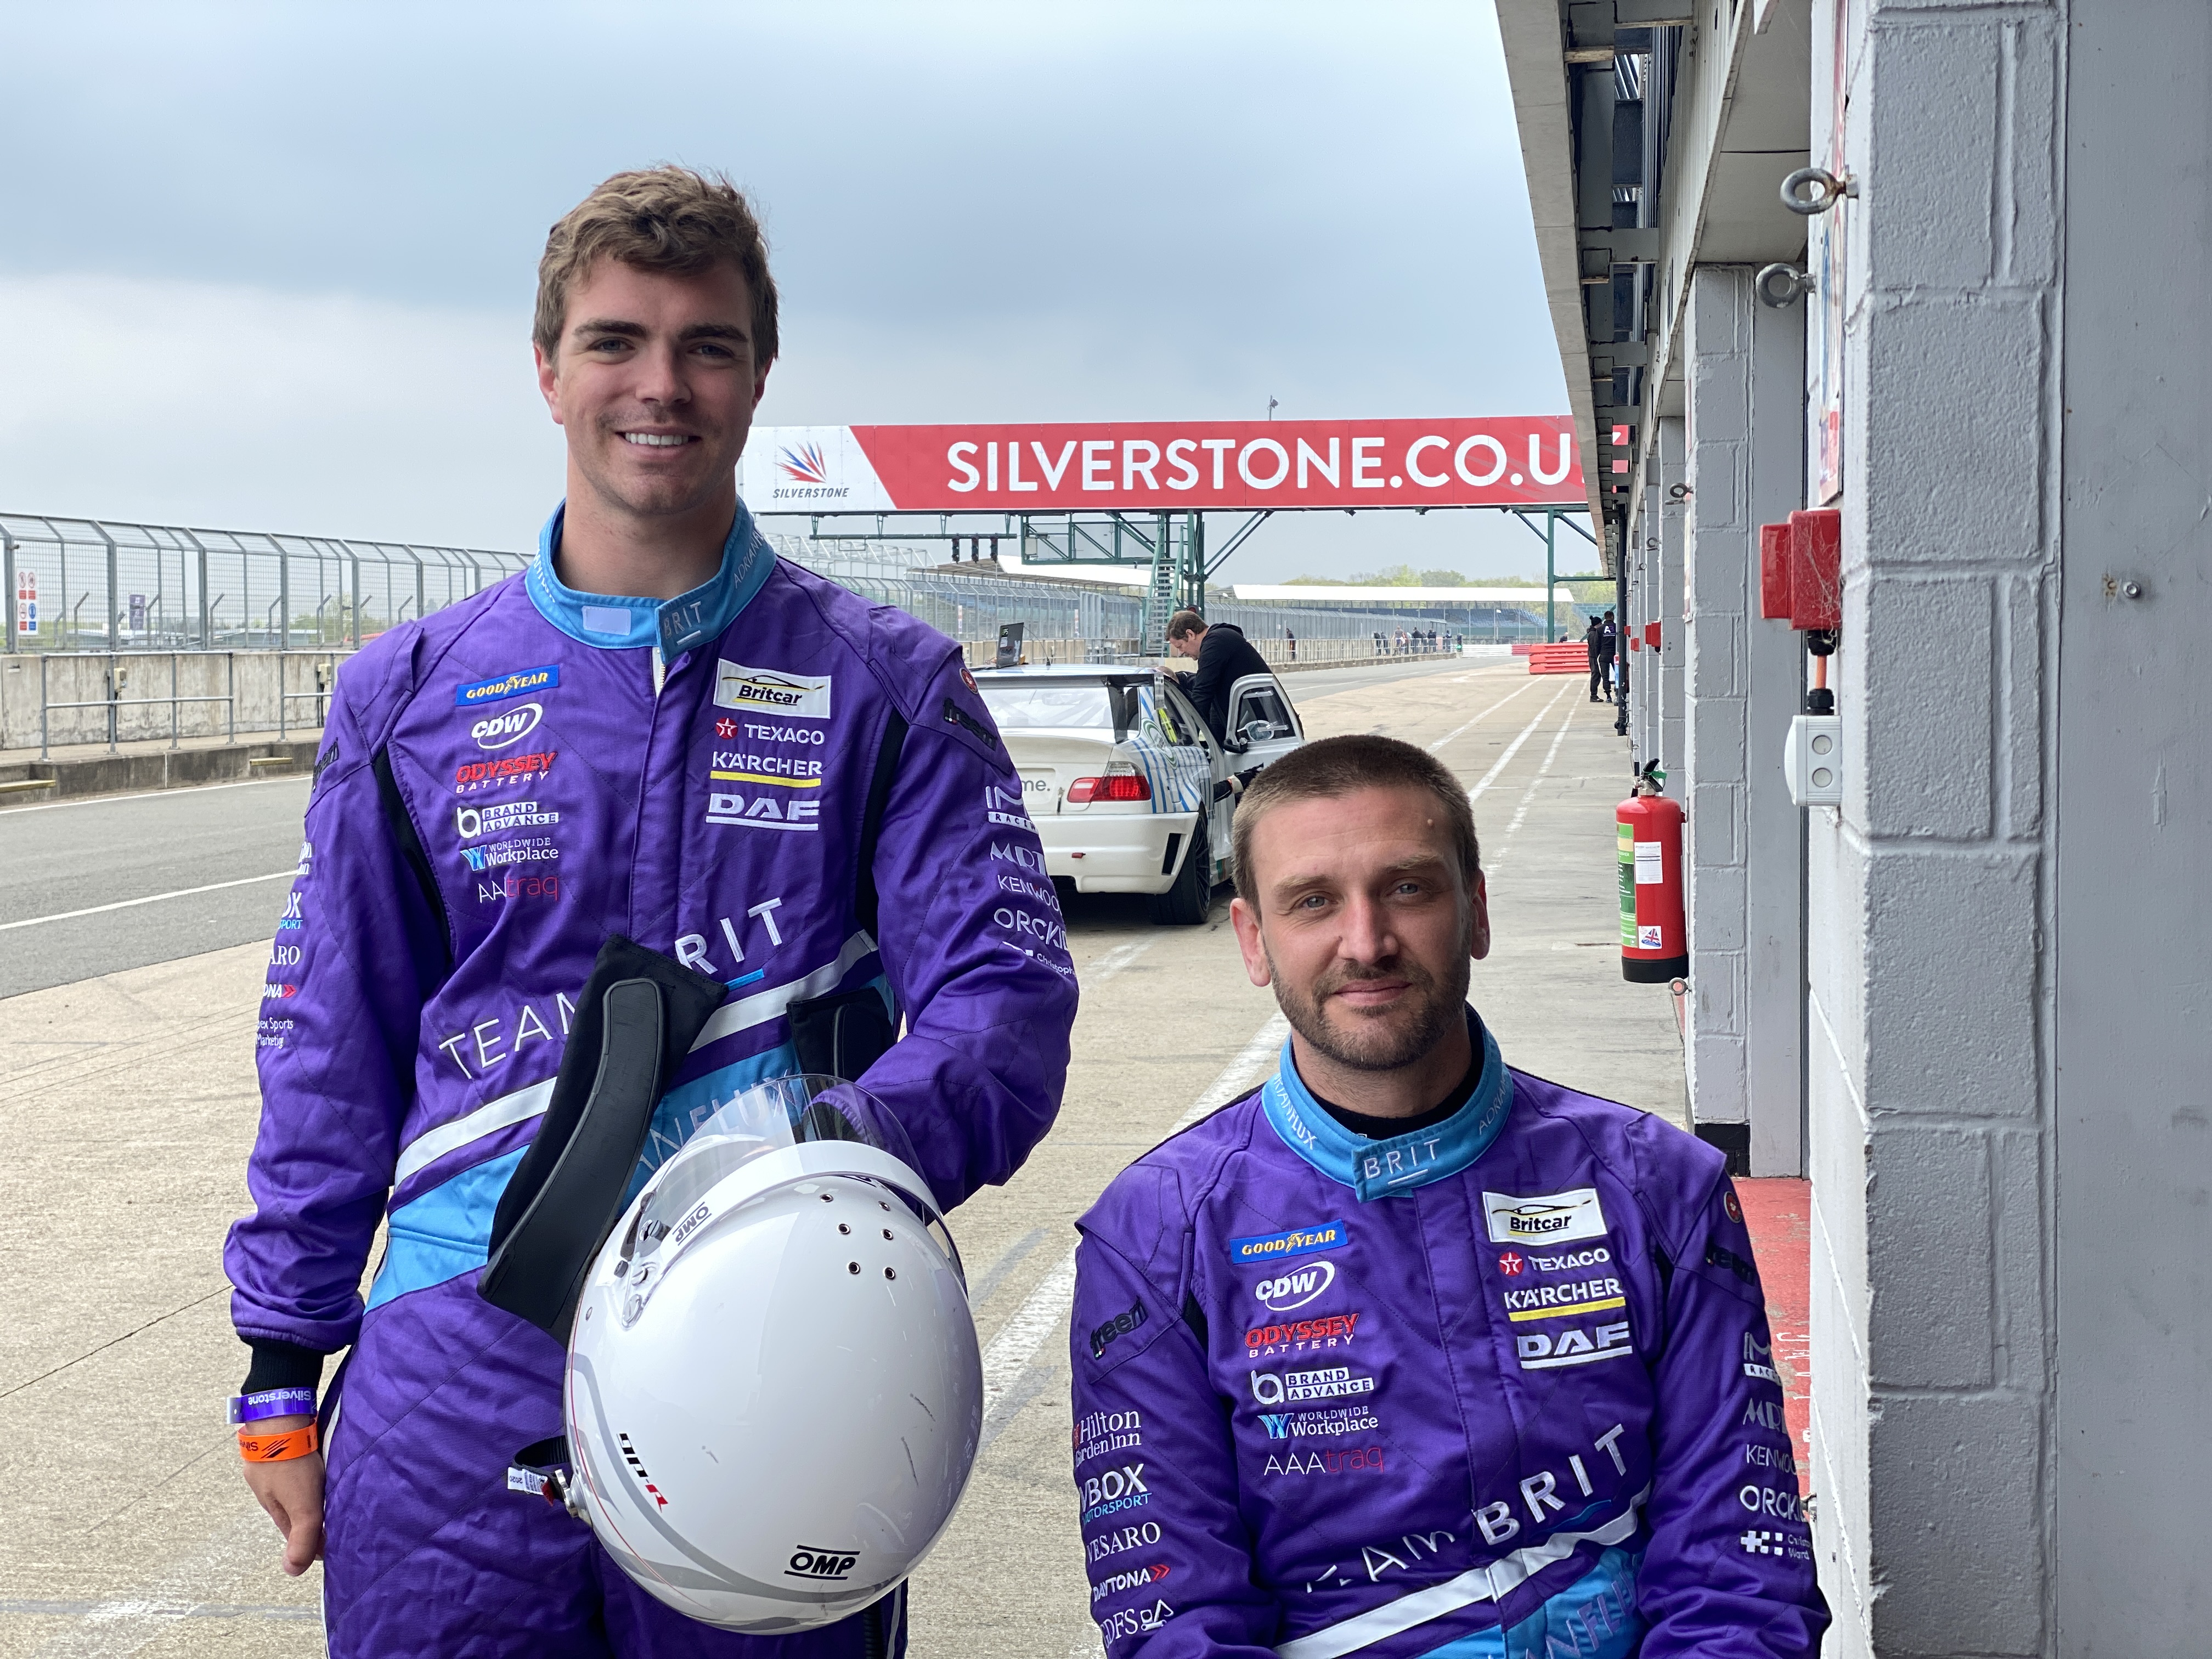 Image shows Chris Overend and another racing driver at Silverstone circuit